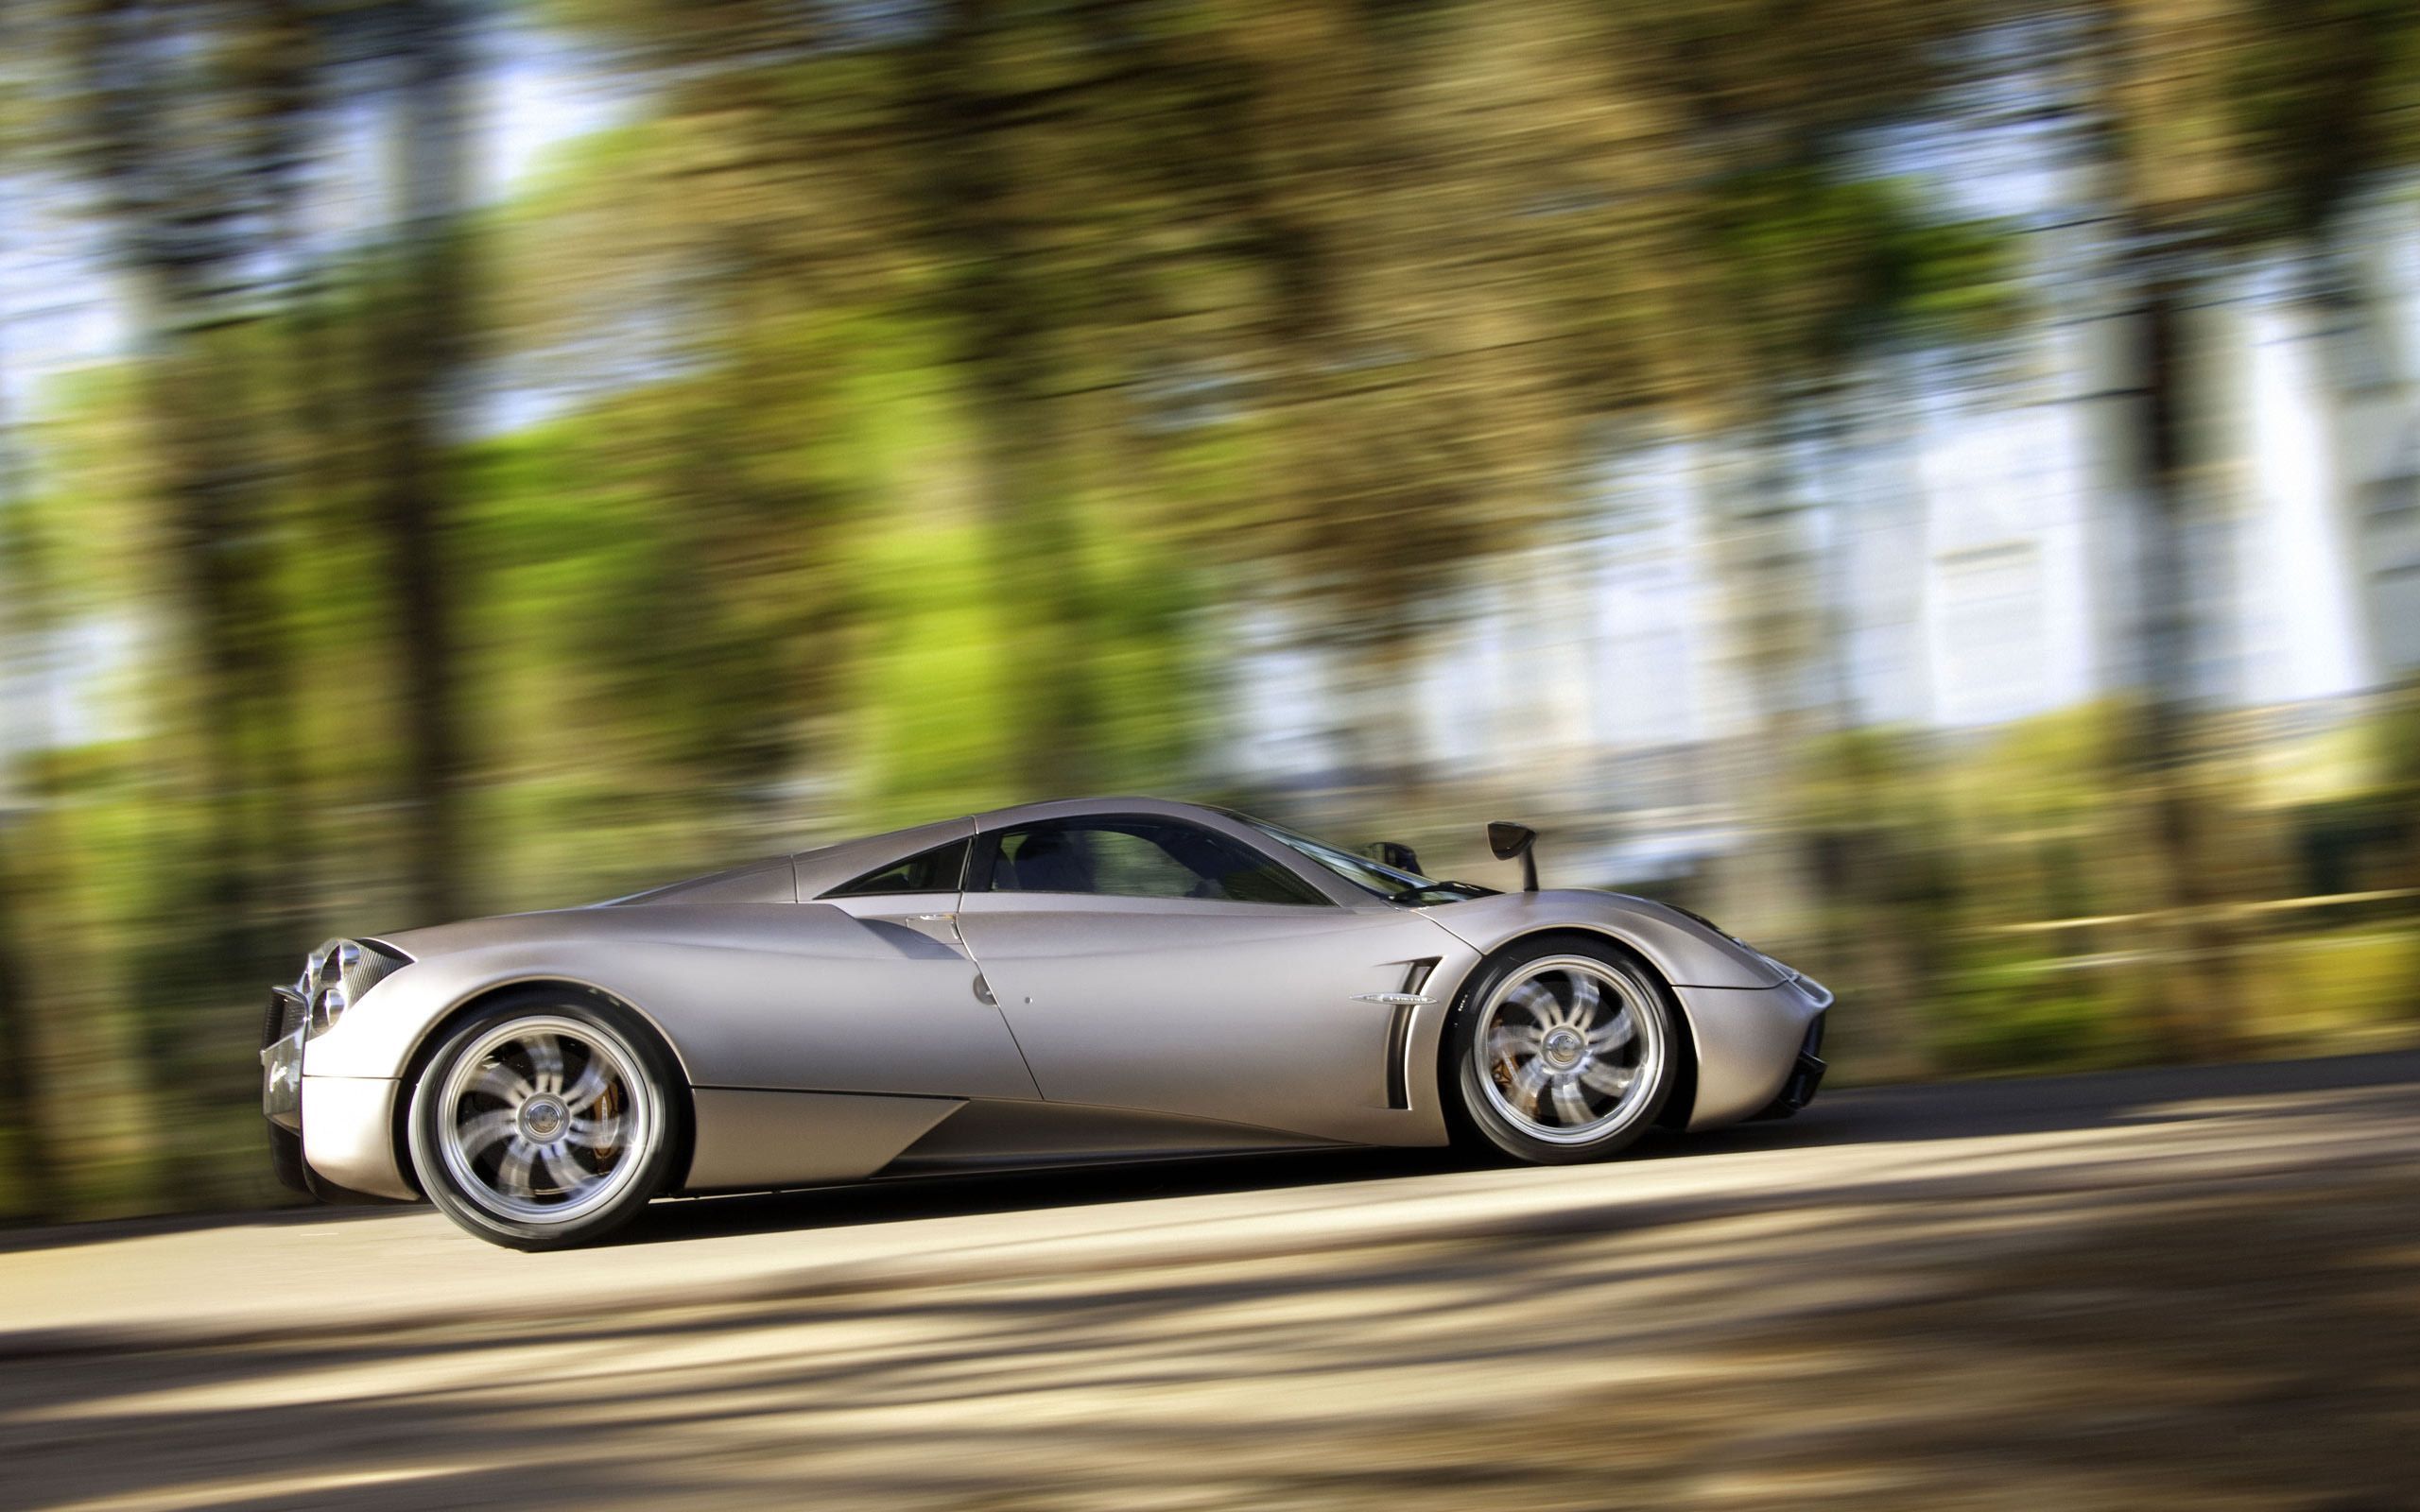 Pagani Huayra wallpapers and images - wallpapers, pictures, photos